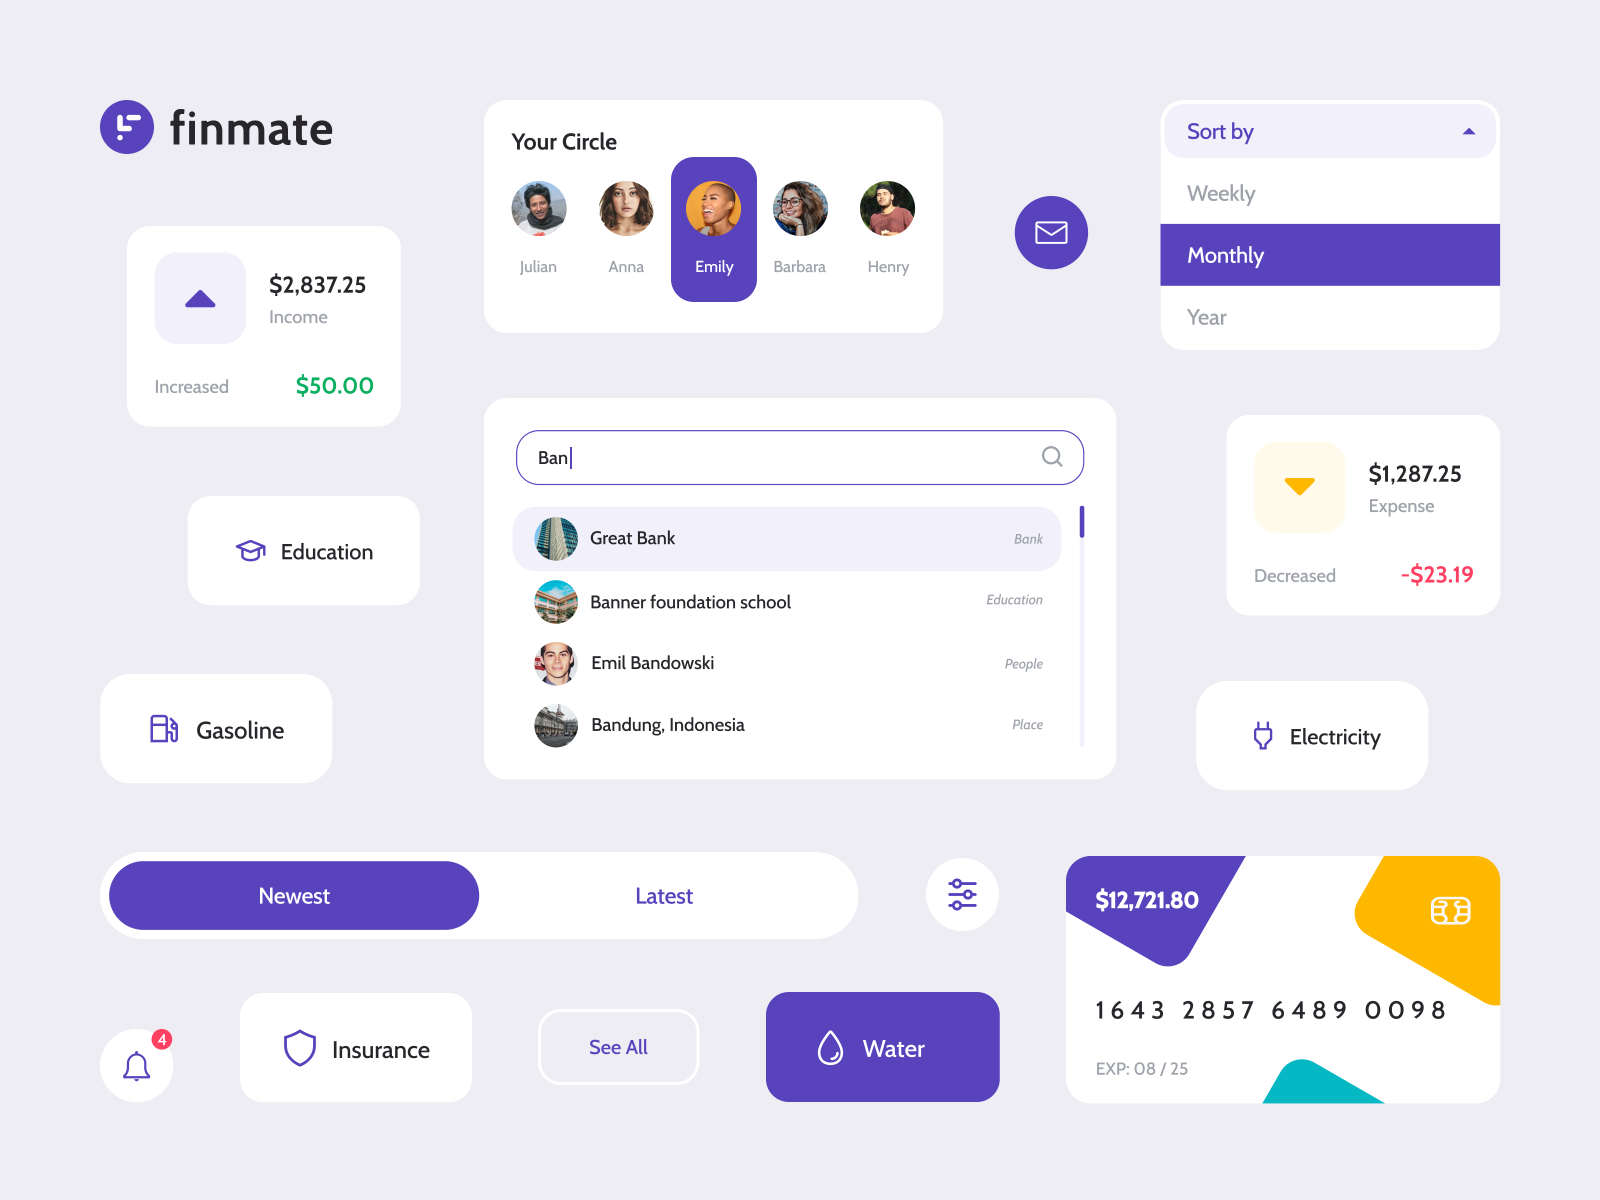 Finmate - Component by Reza M. R. on Dribbble